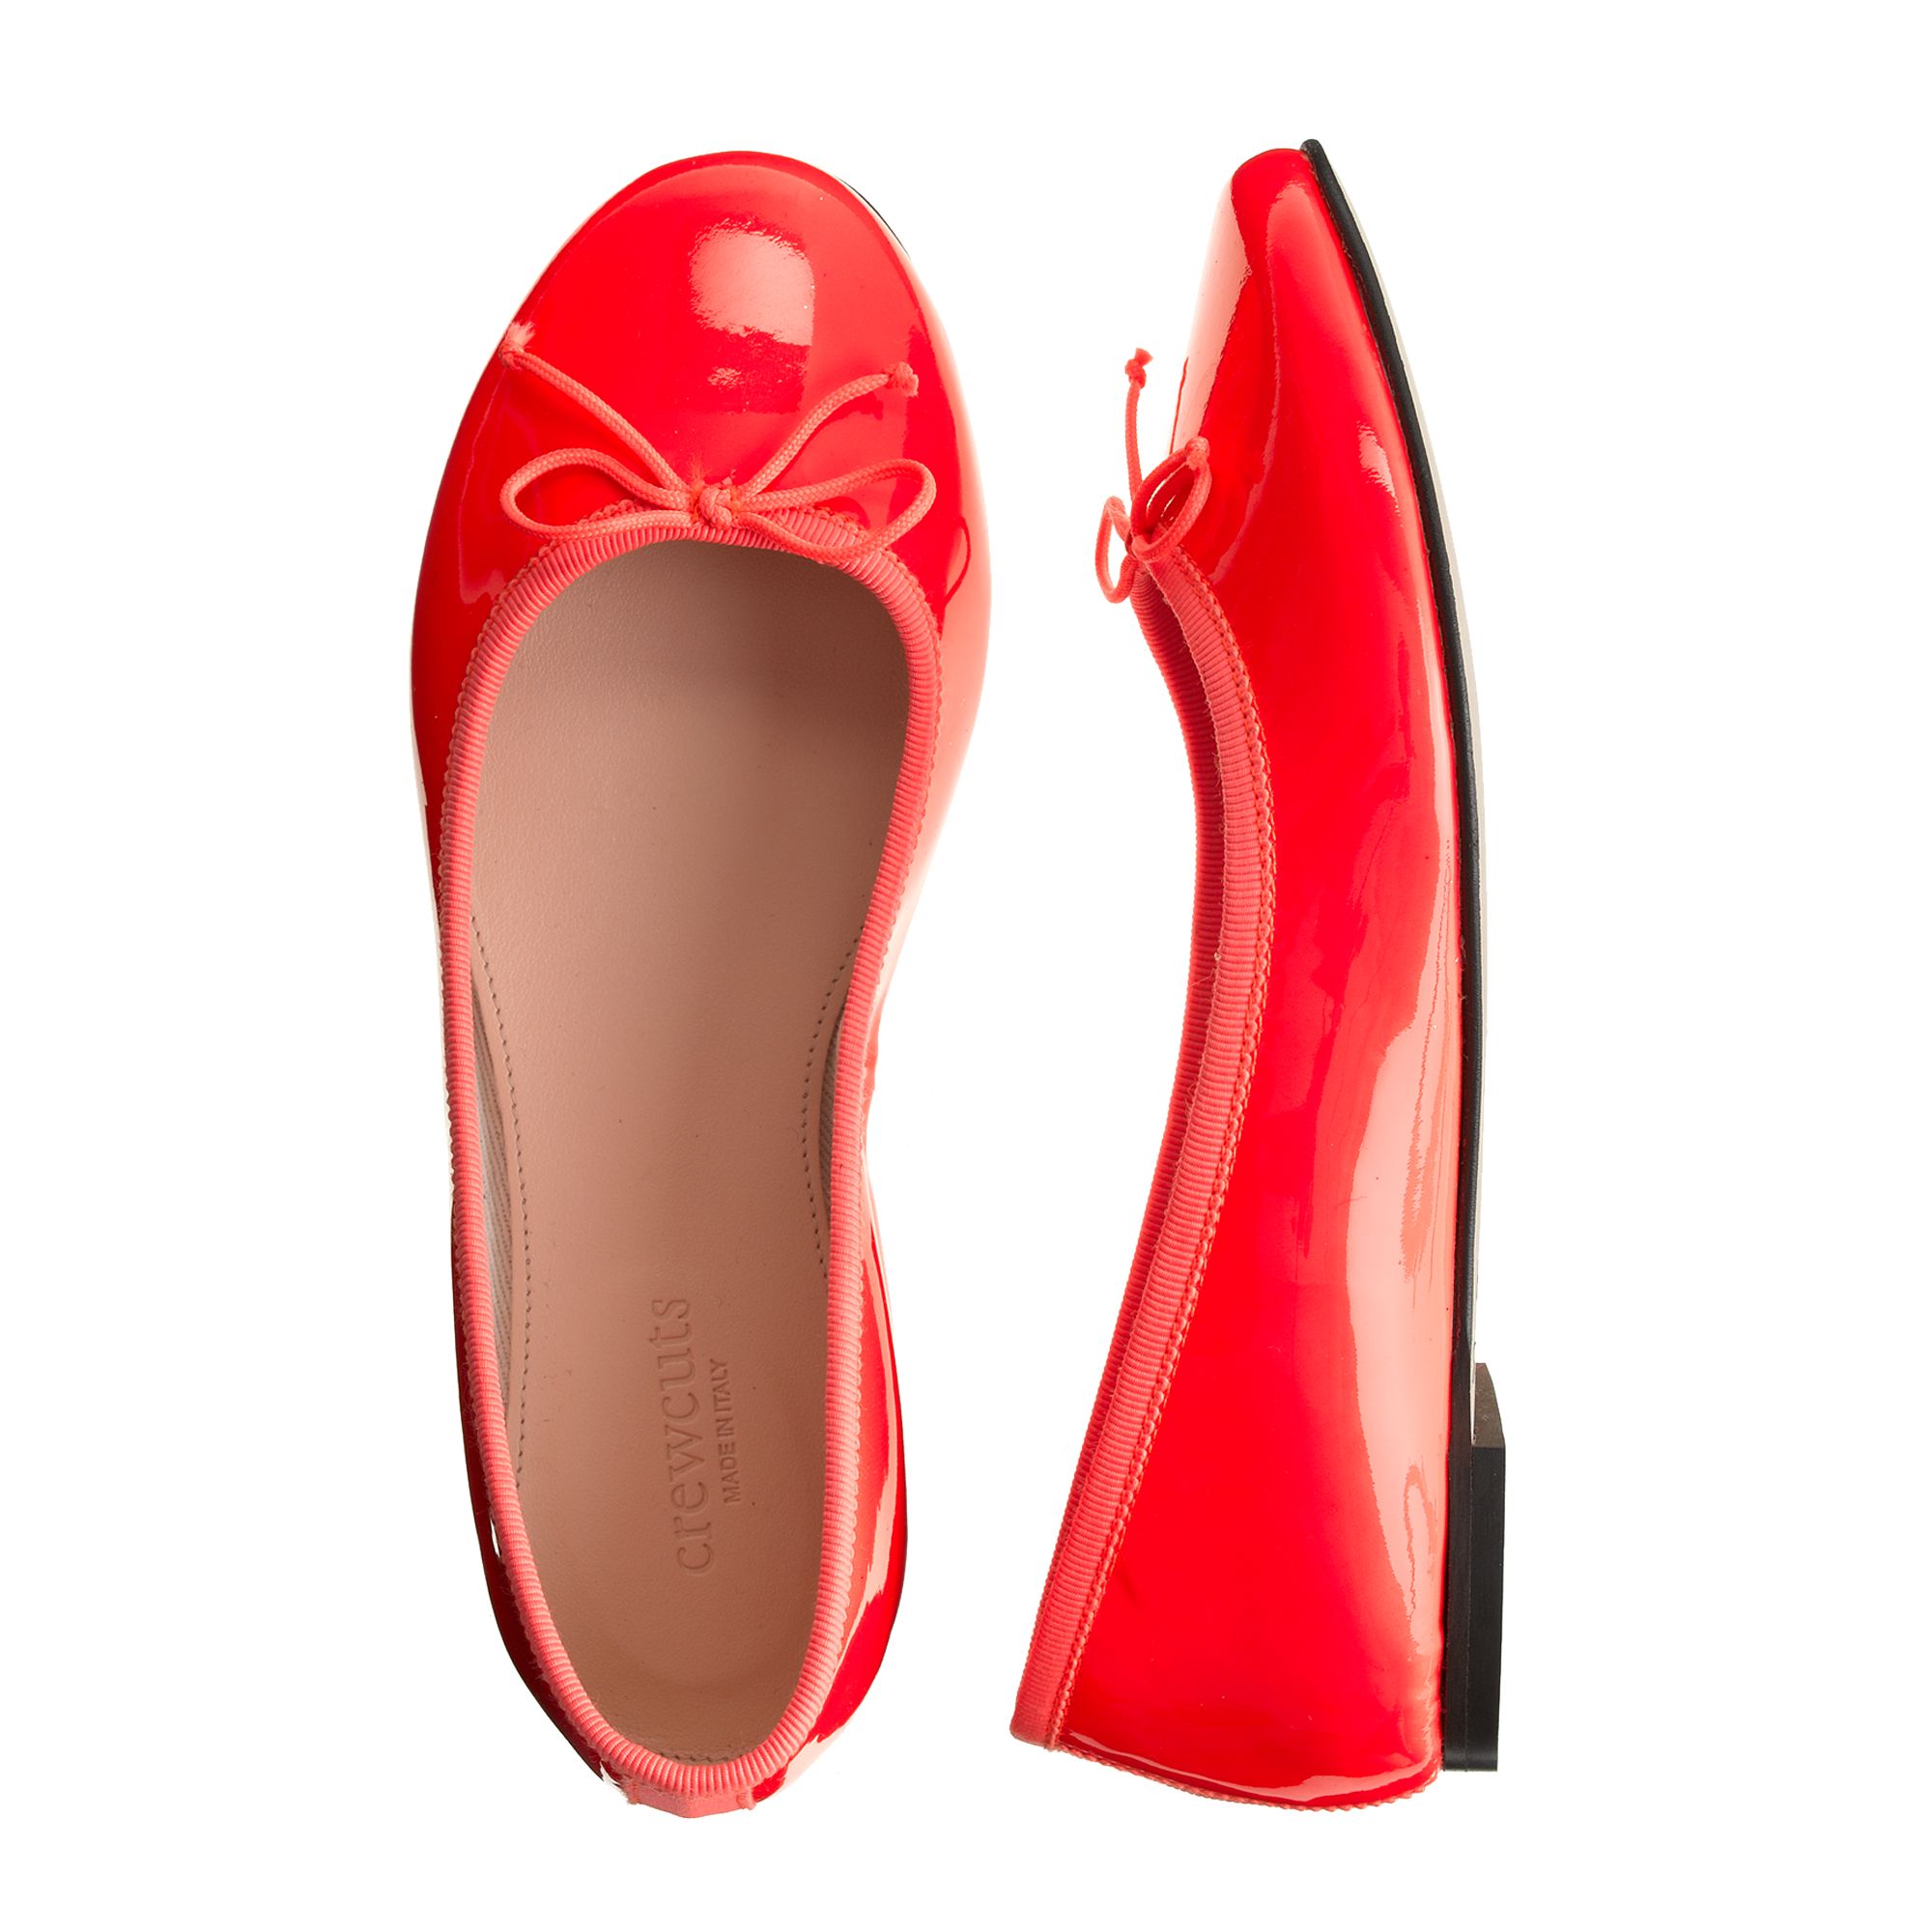 Lyst - J.Crew Girls Classic Patent Ballet Flats in Red